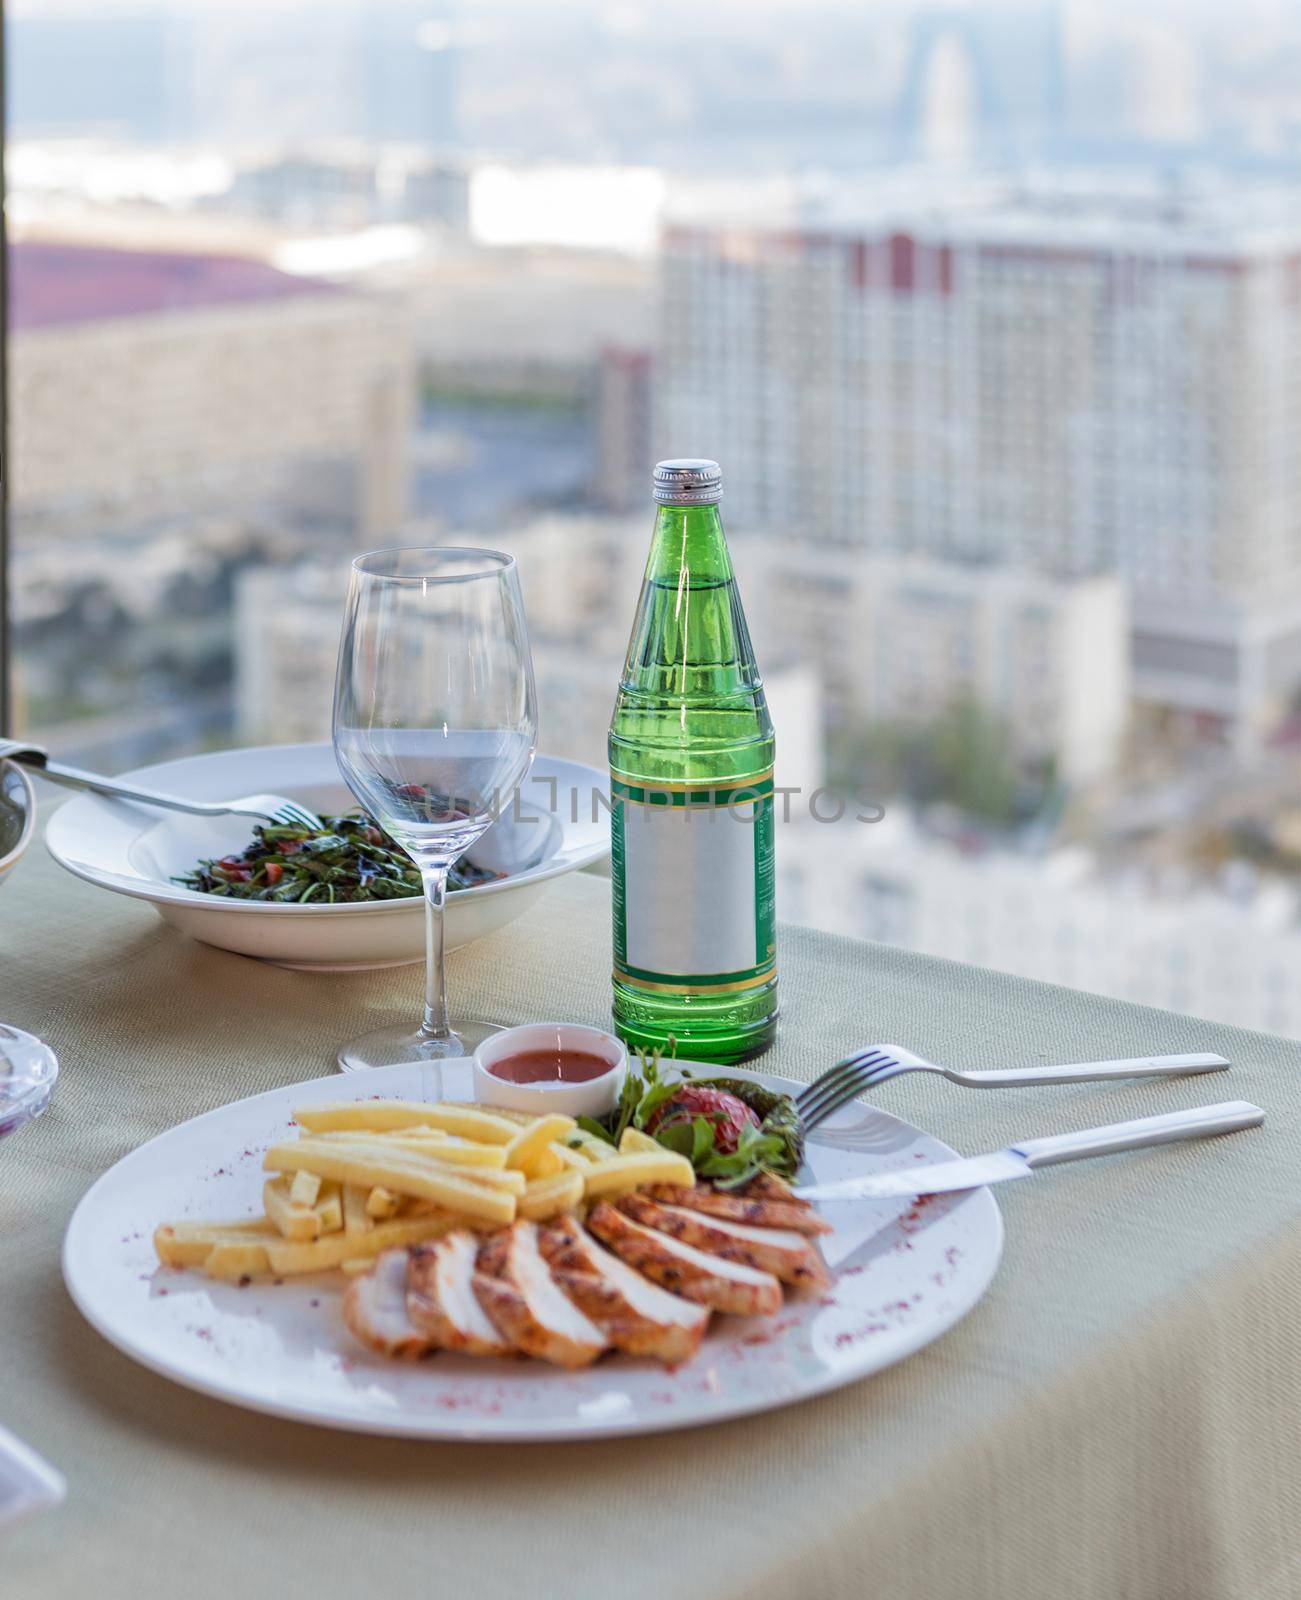 Fried chicken with french fries, water bottle and city view